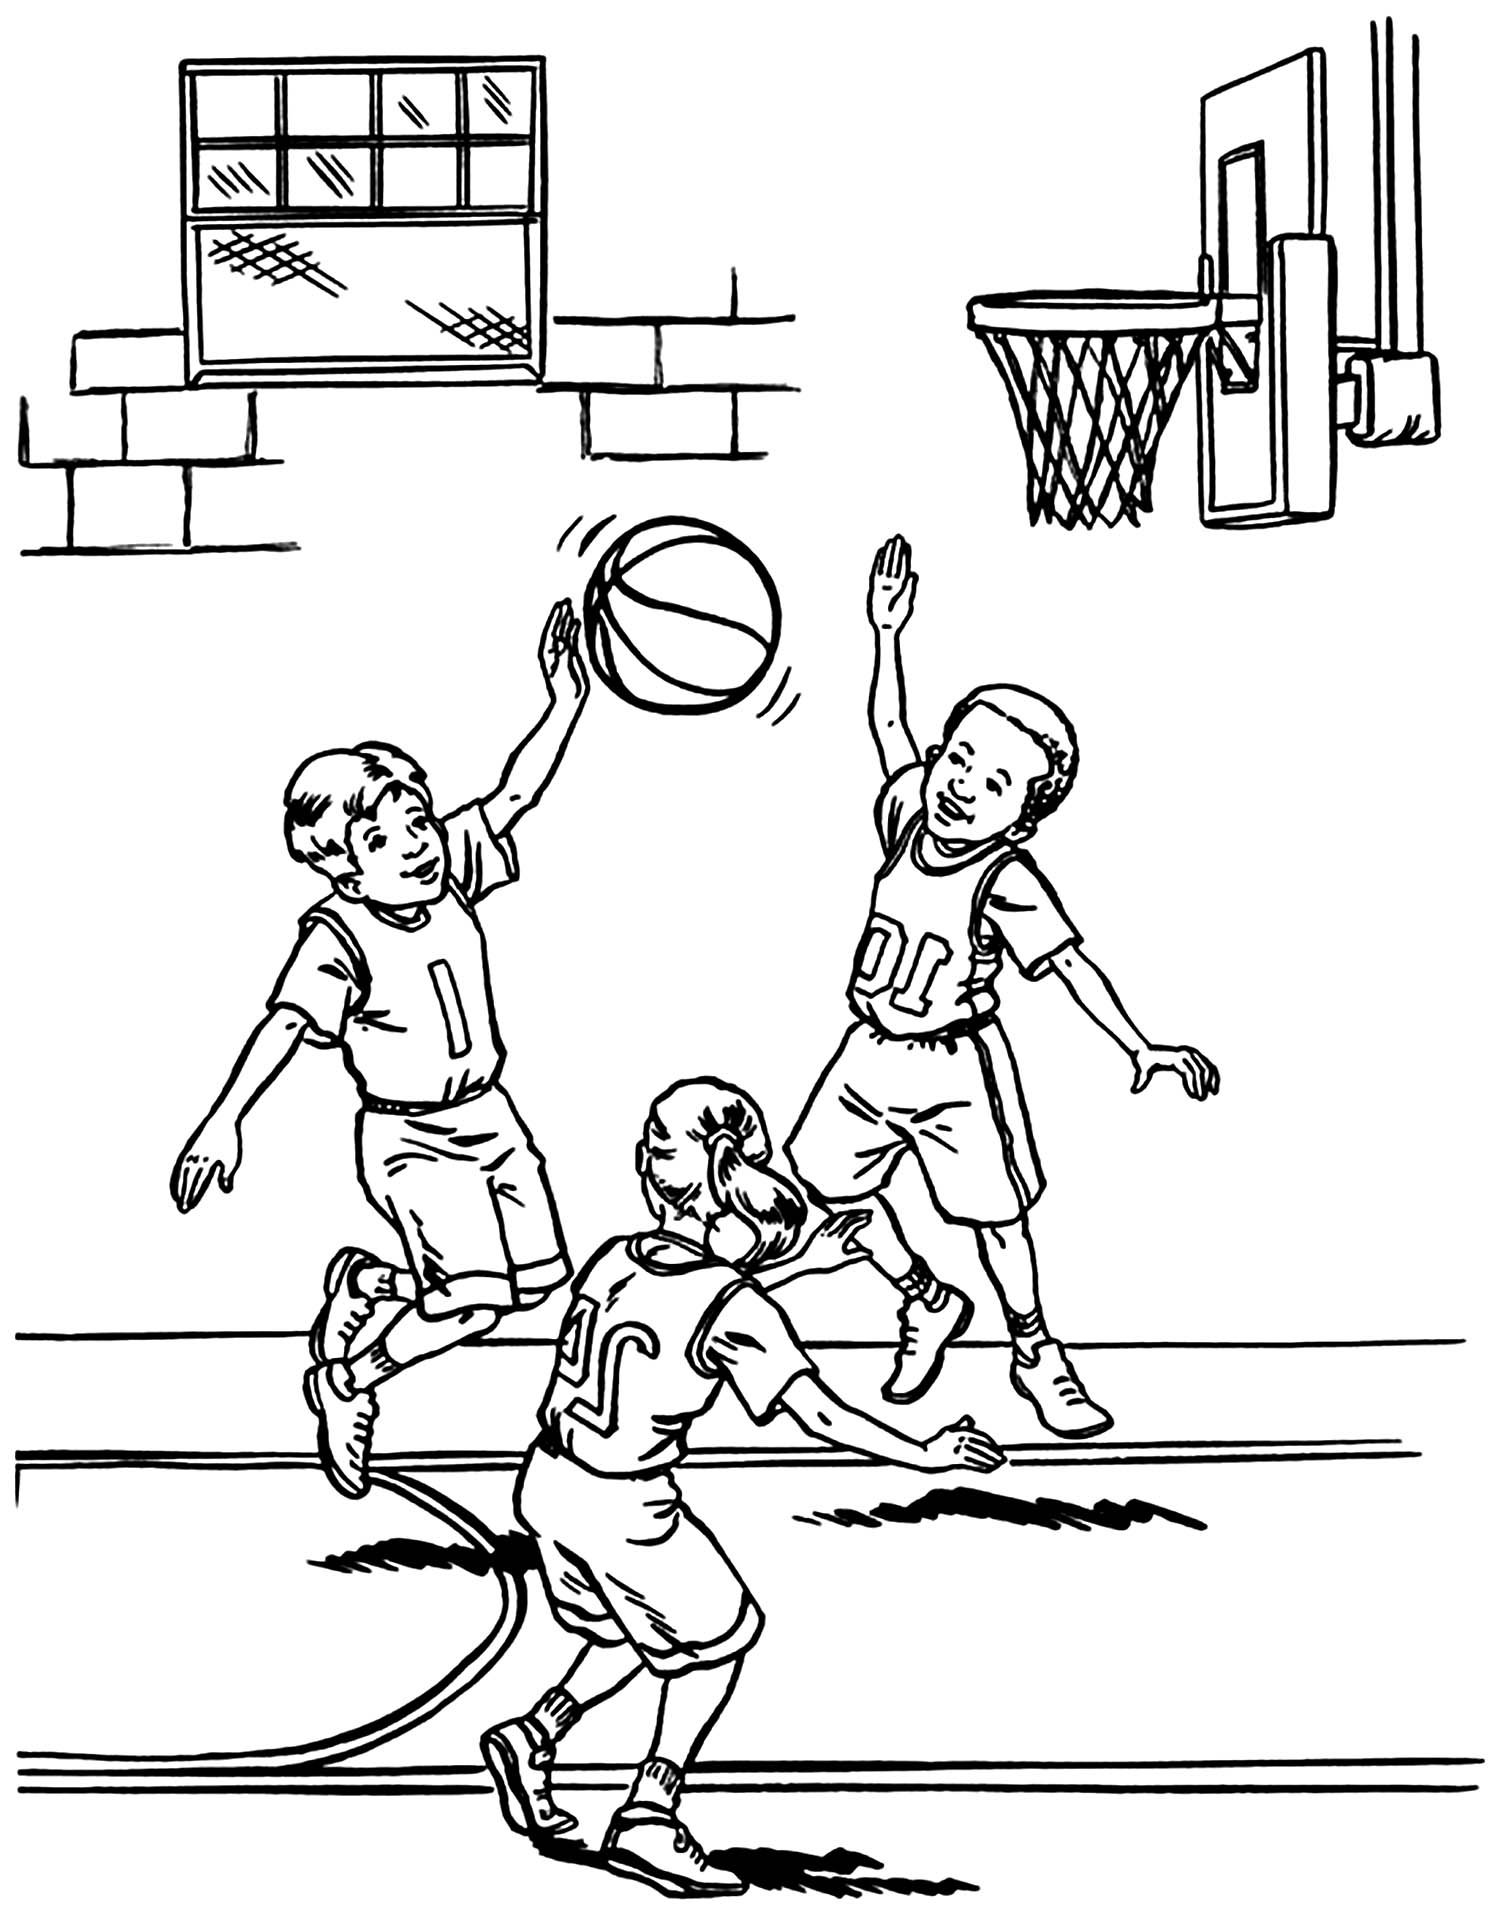 Basketball coloring page to download